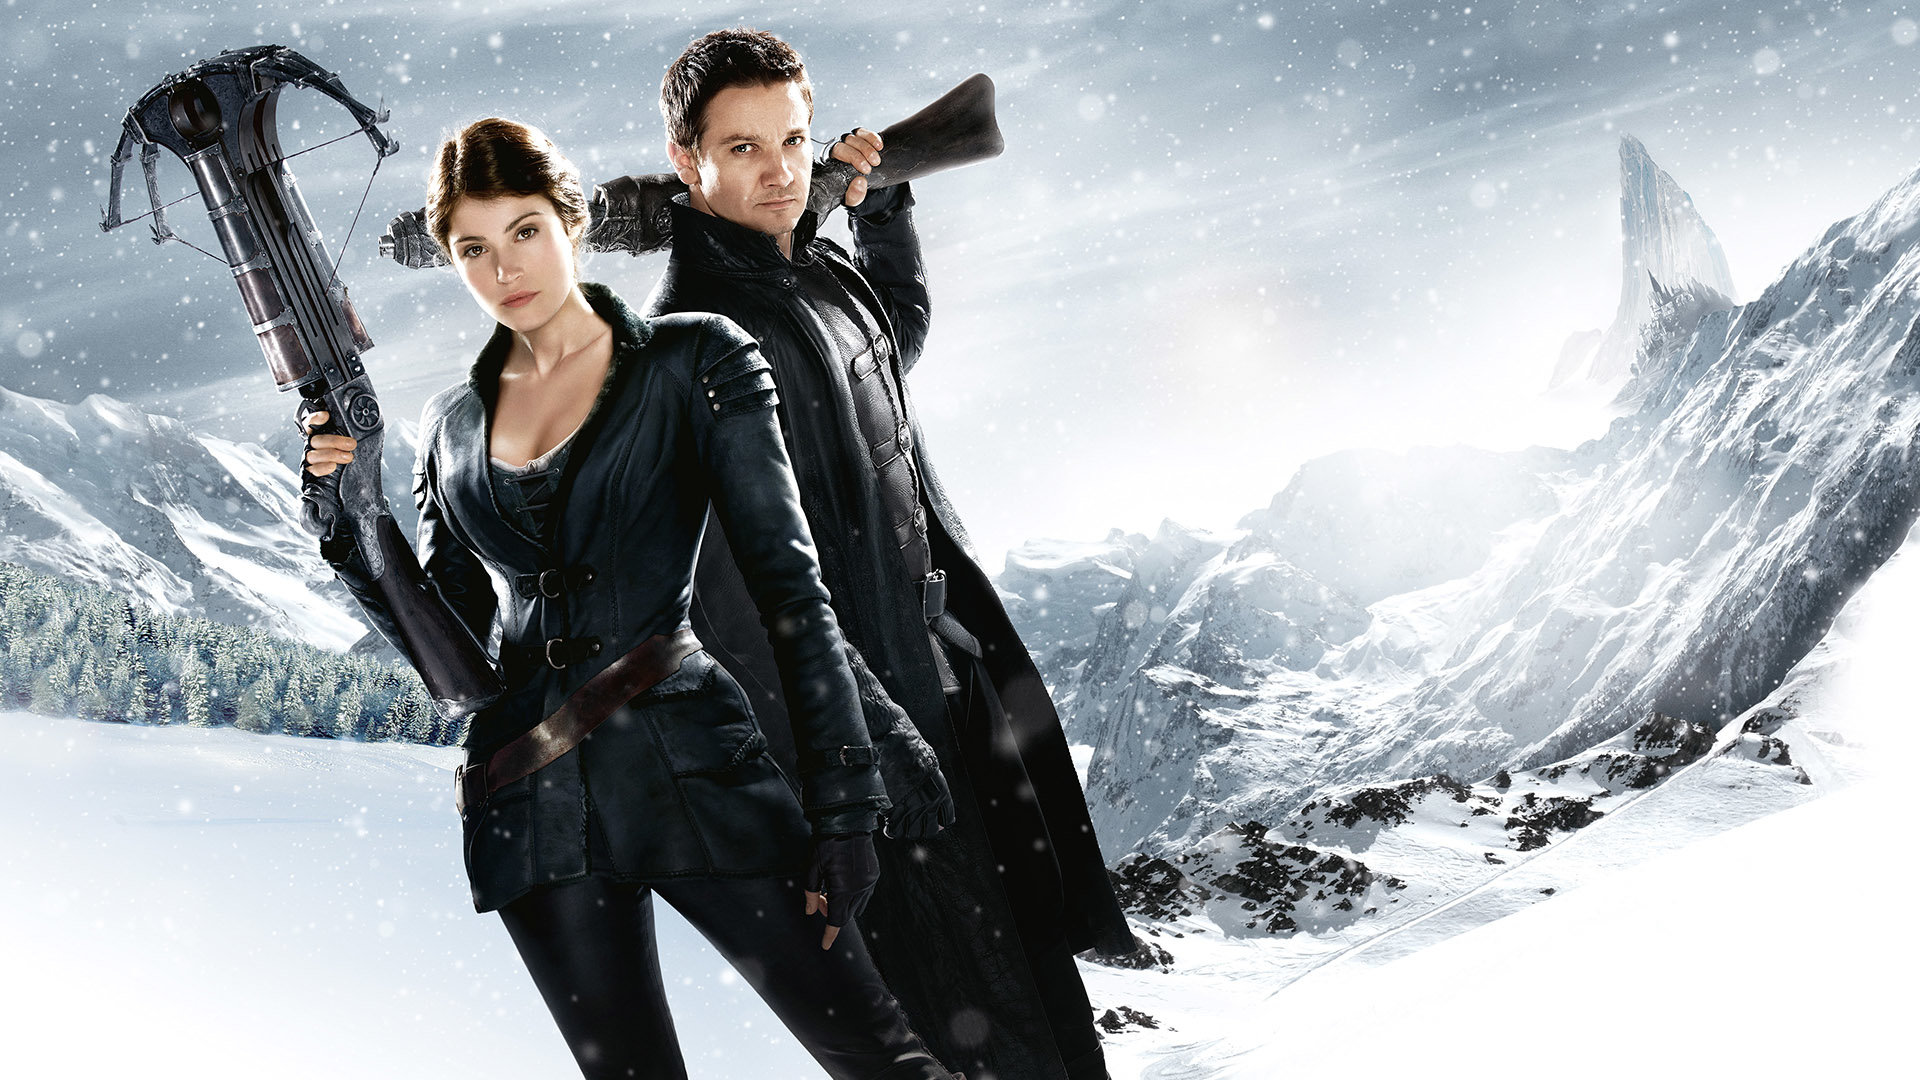 Download full hd 1920x1080 Hansel & Gretel: Witch Hunters desktop background ID:321418 for free